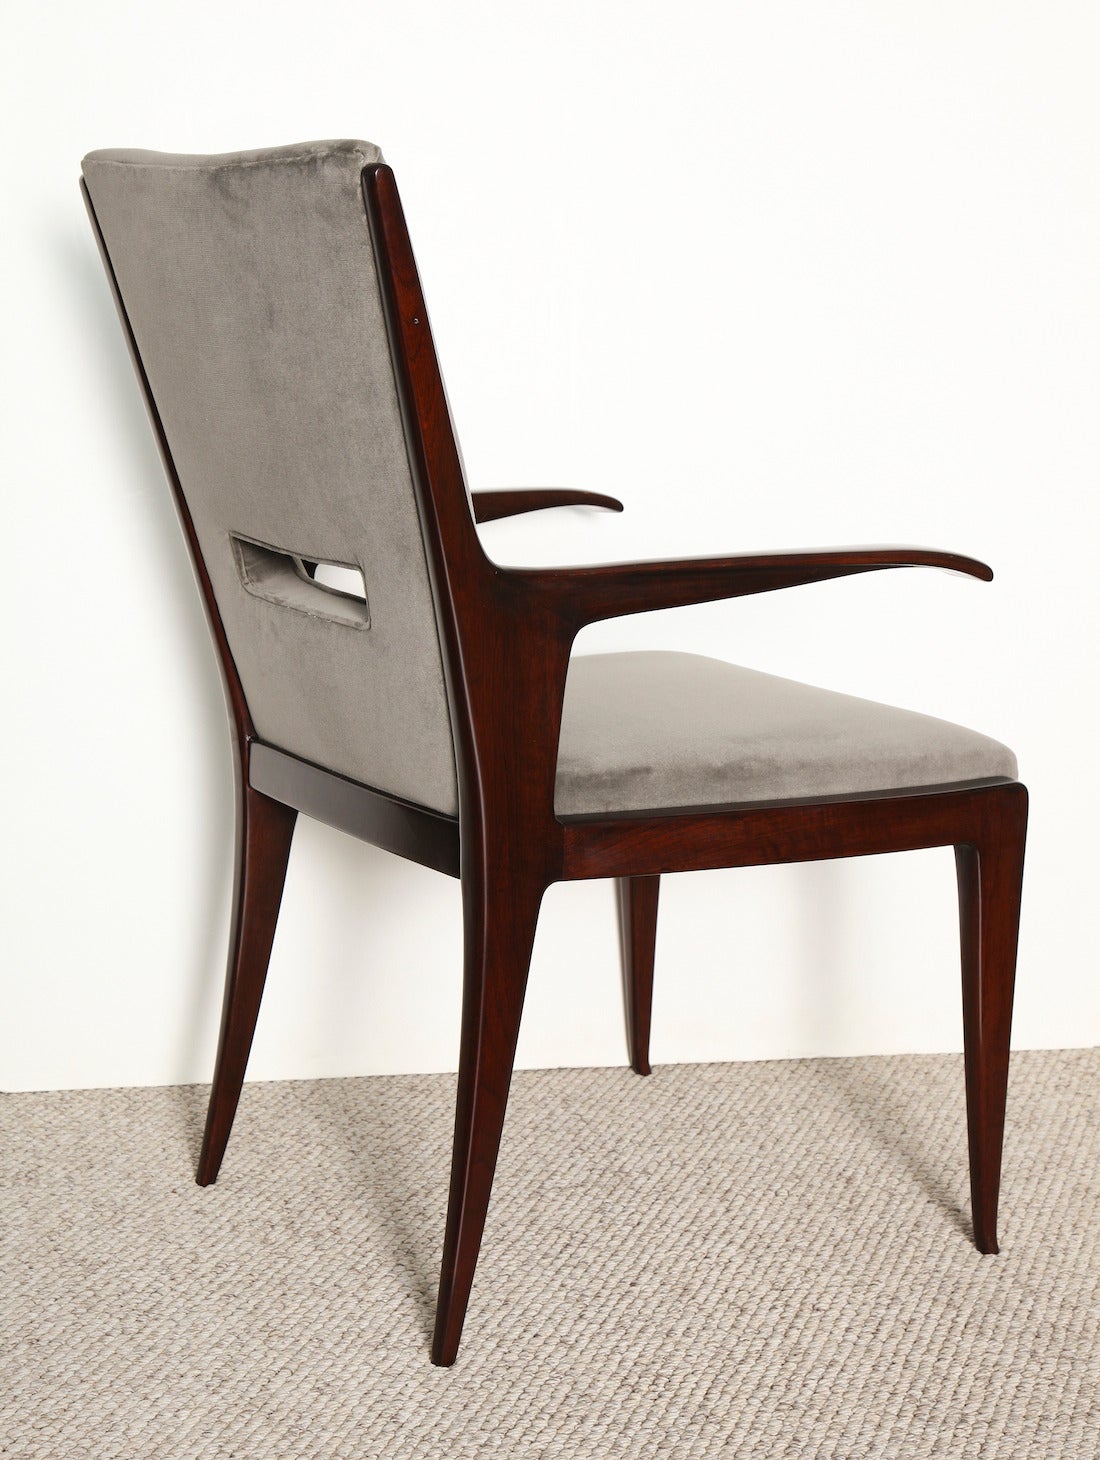 Unusual chair design with sculpted arms and cut-out on back.   Dark stained wood and light gray velvet upholstery.  *Literature; Guglielmo Ulrich, Luca Sacchetti,  Pg.188, for a similar model.